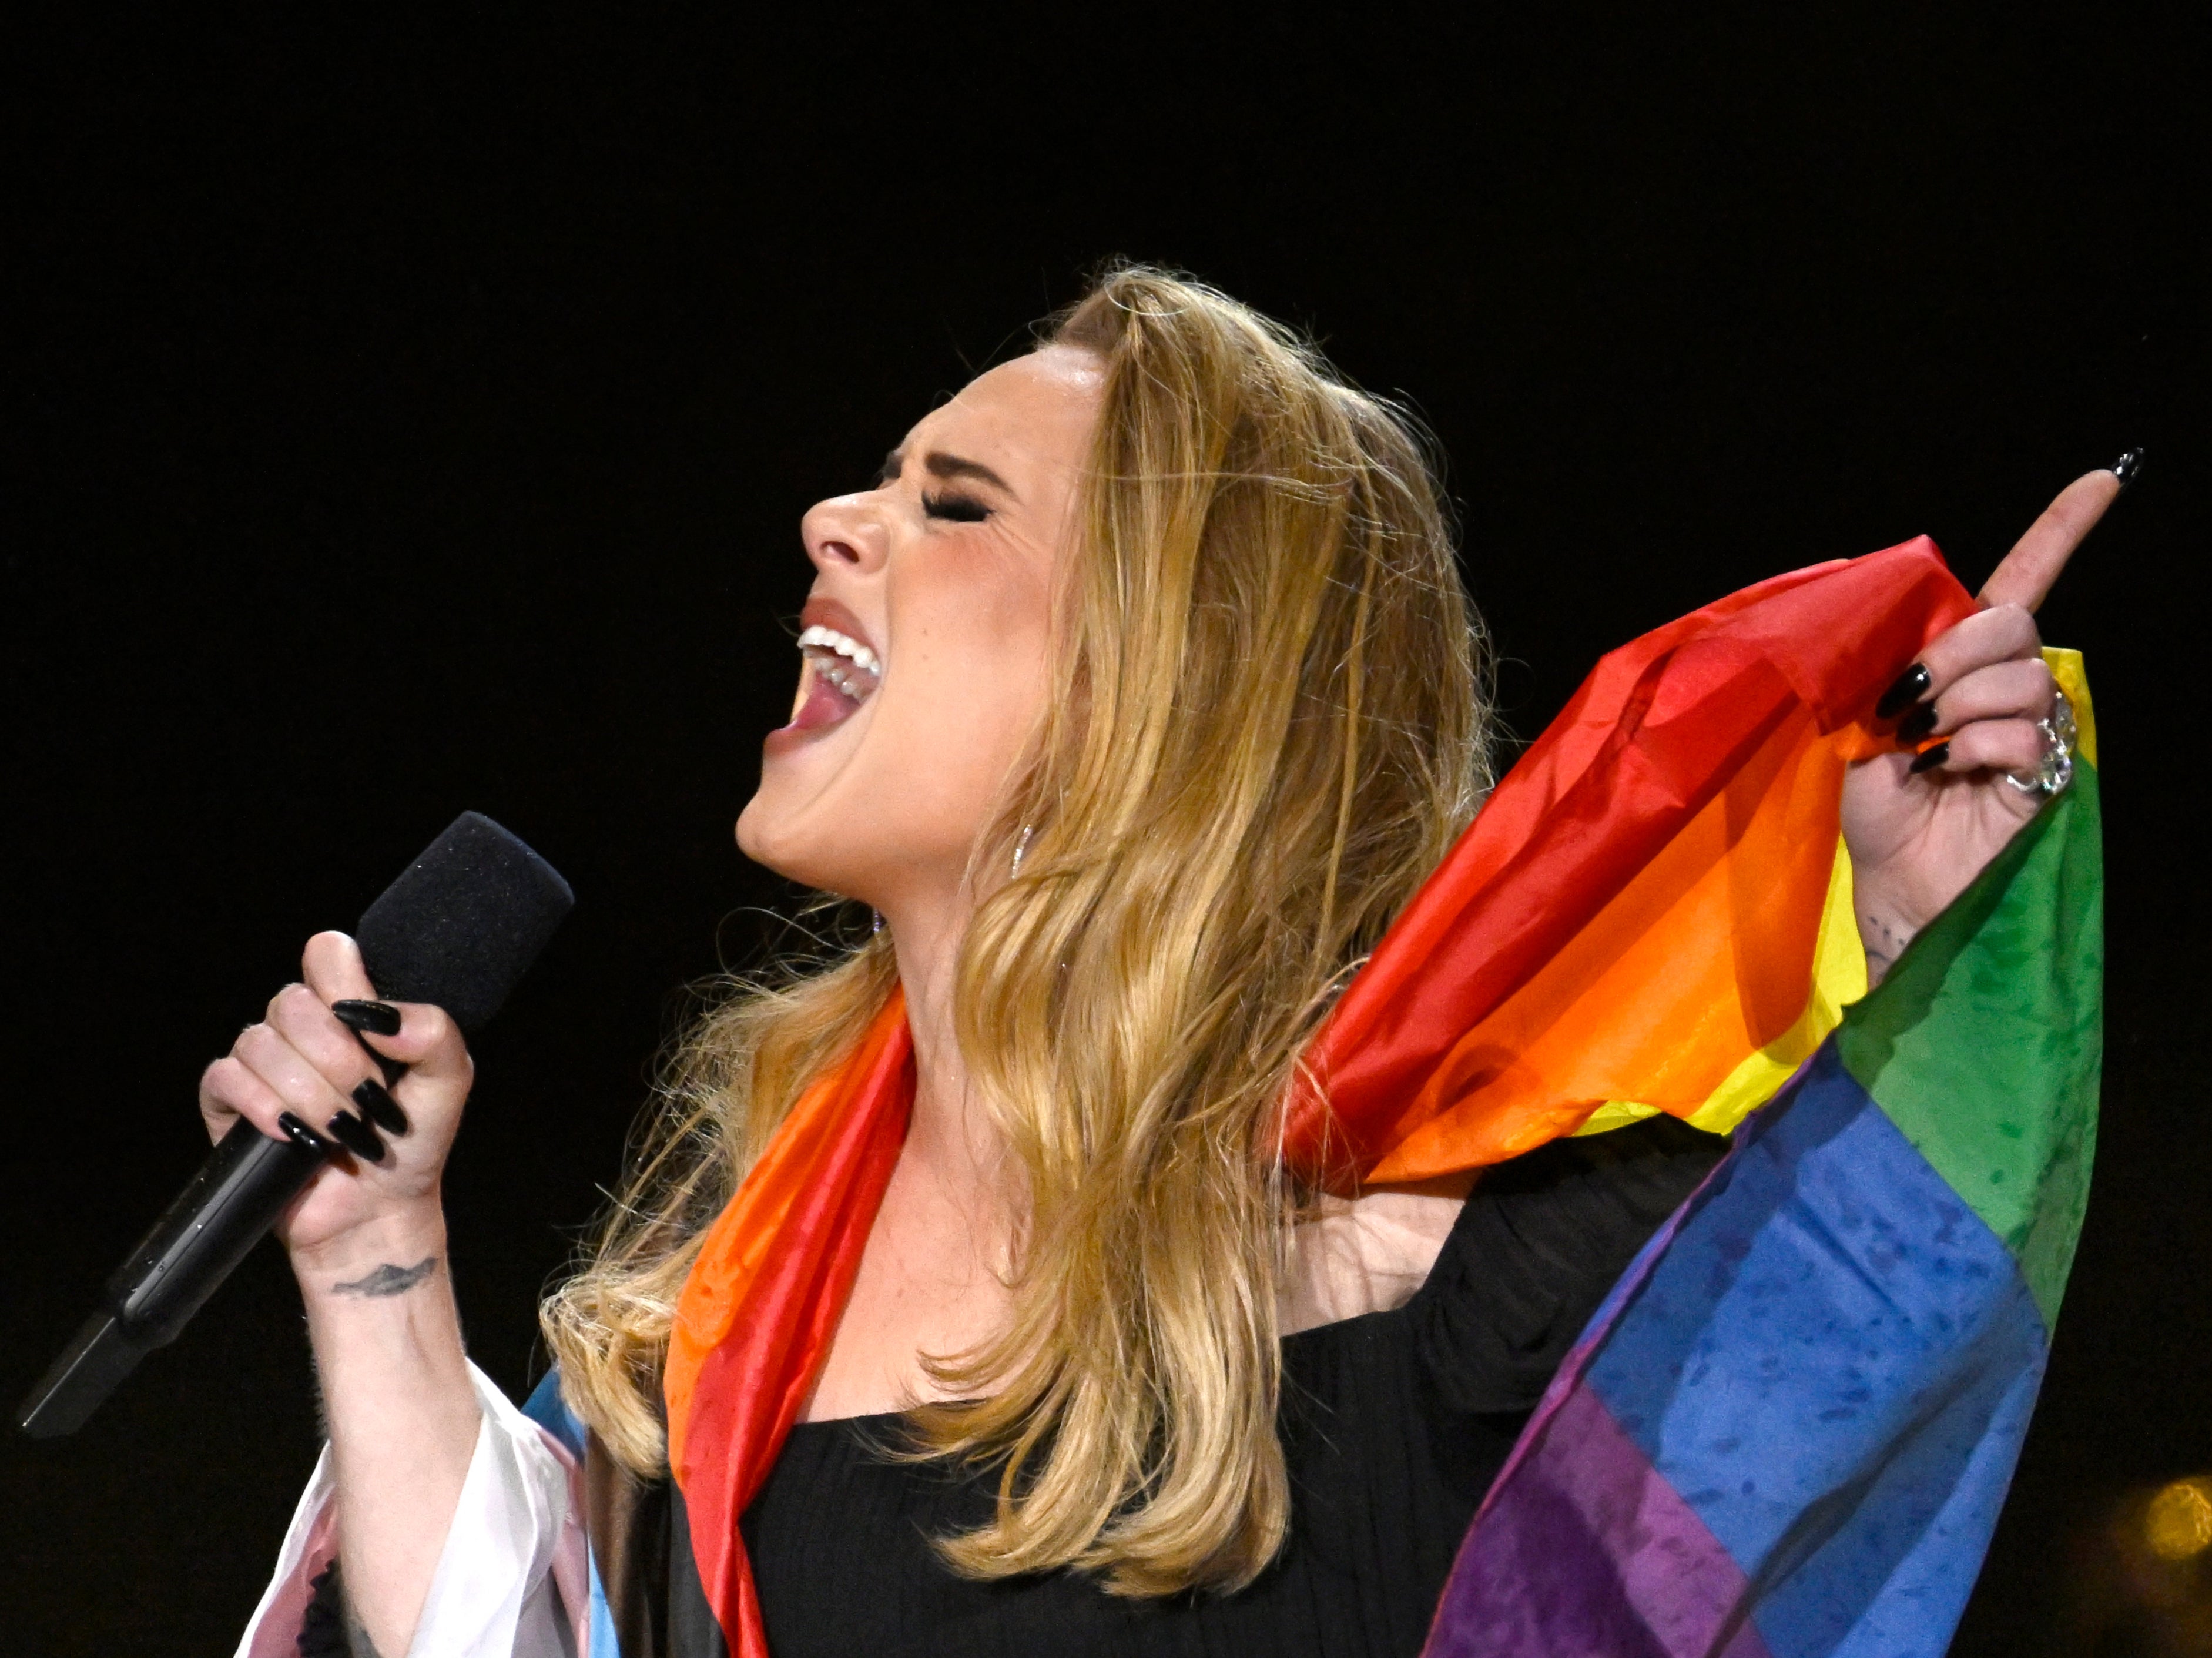 Adele has been a strong advocate for Pride over the years